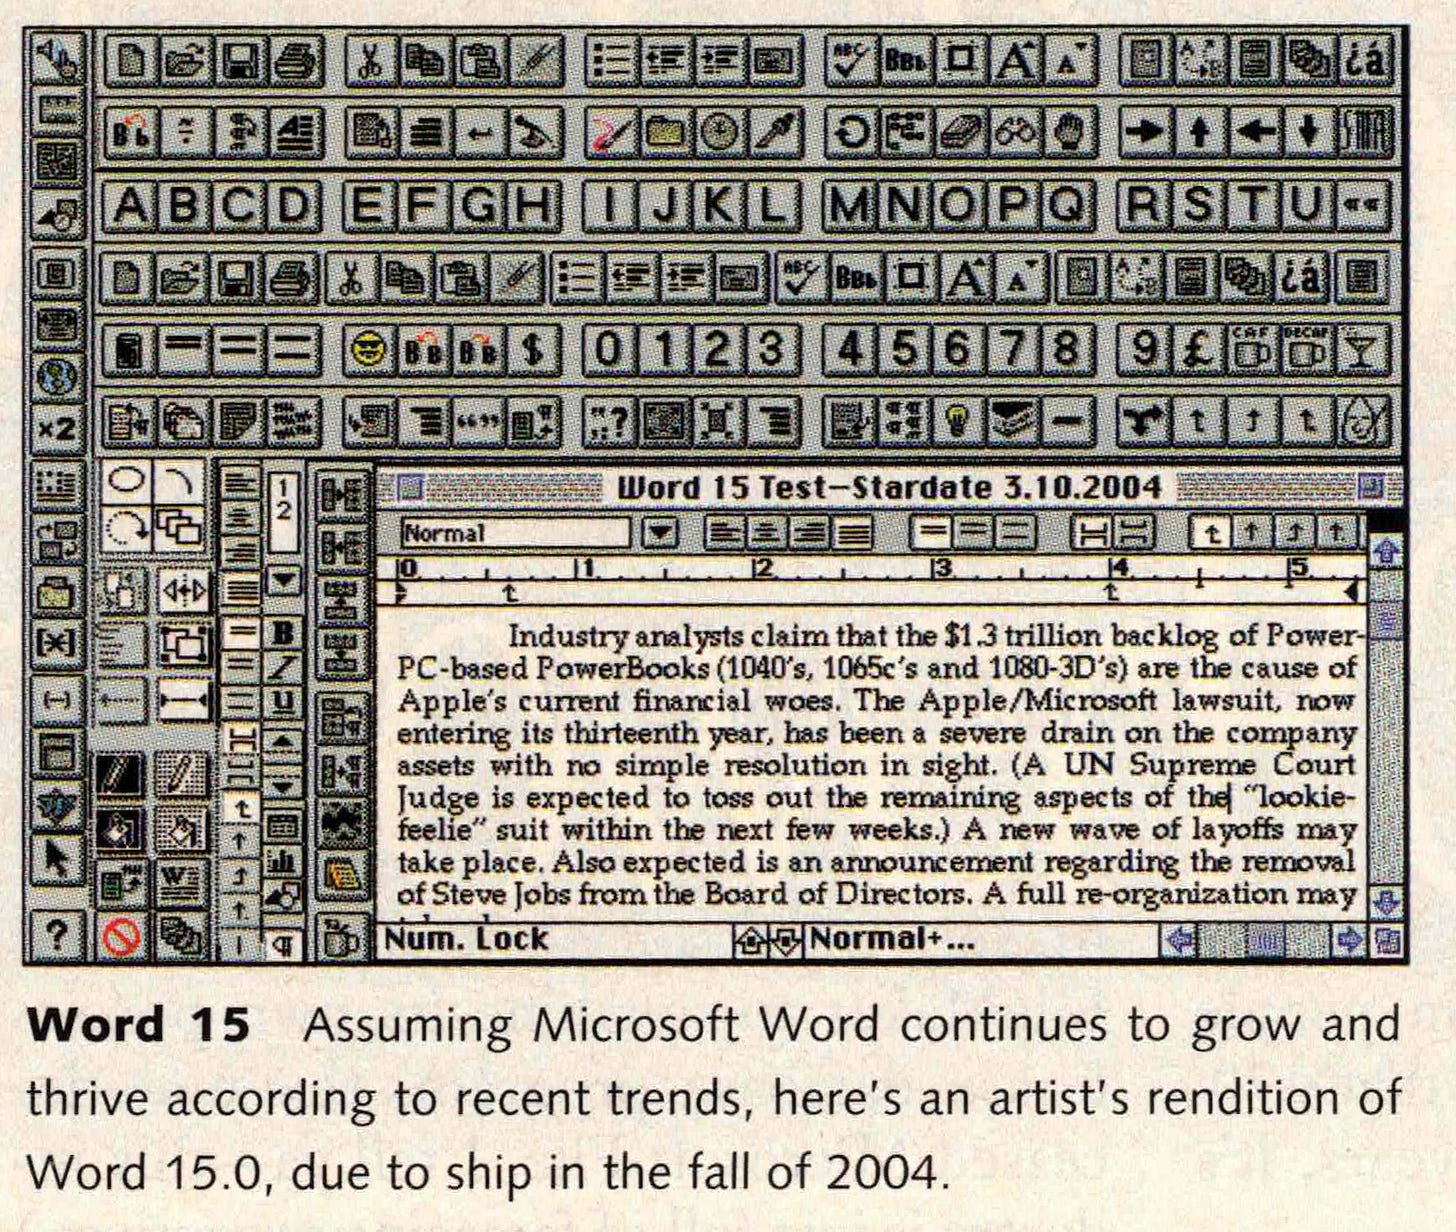 Word 15 Assuming Microsoft Word continues to grow and thrive according to recent trends, here's an artist's rendition of Word 15.0, due to ship in the fall of 2004. -- Screen shot showing a zillion buttons and a tiny area to type.